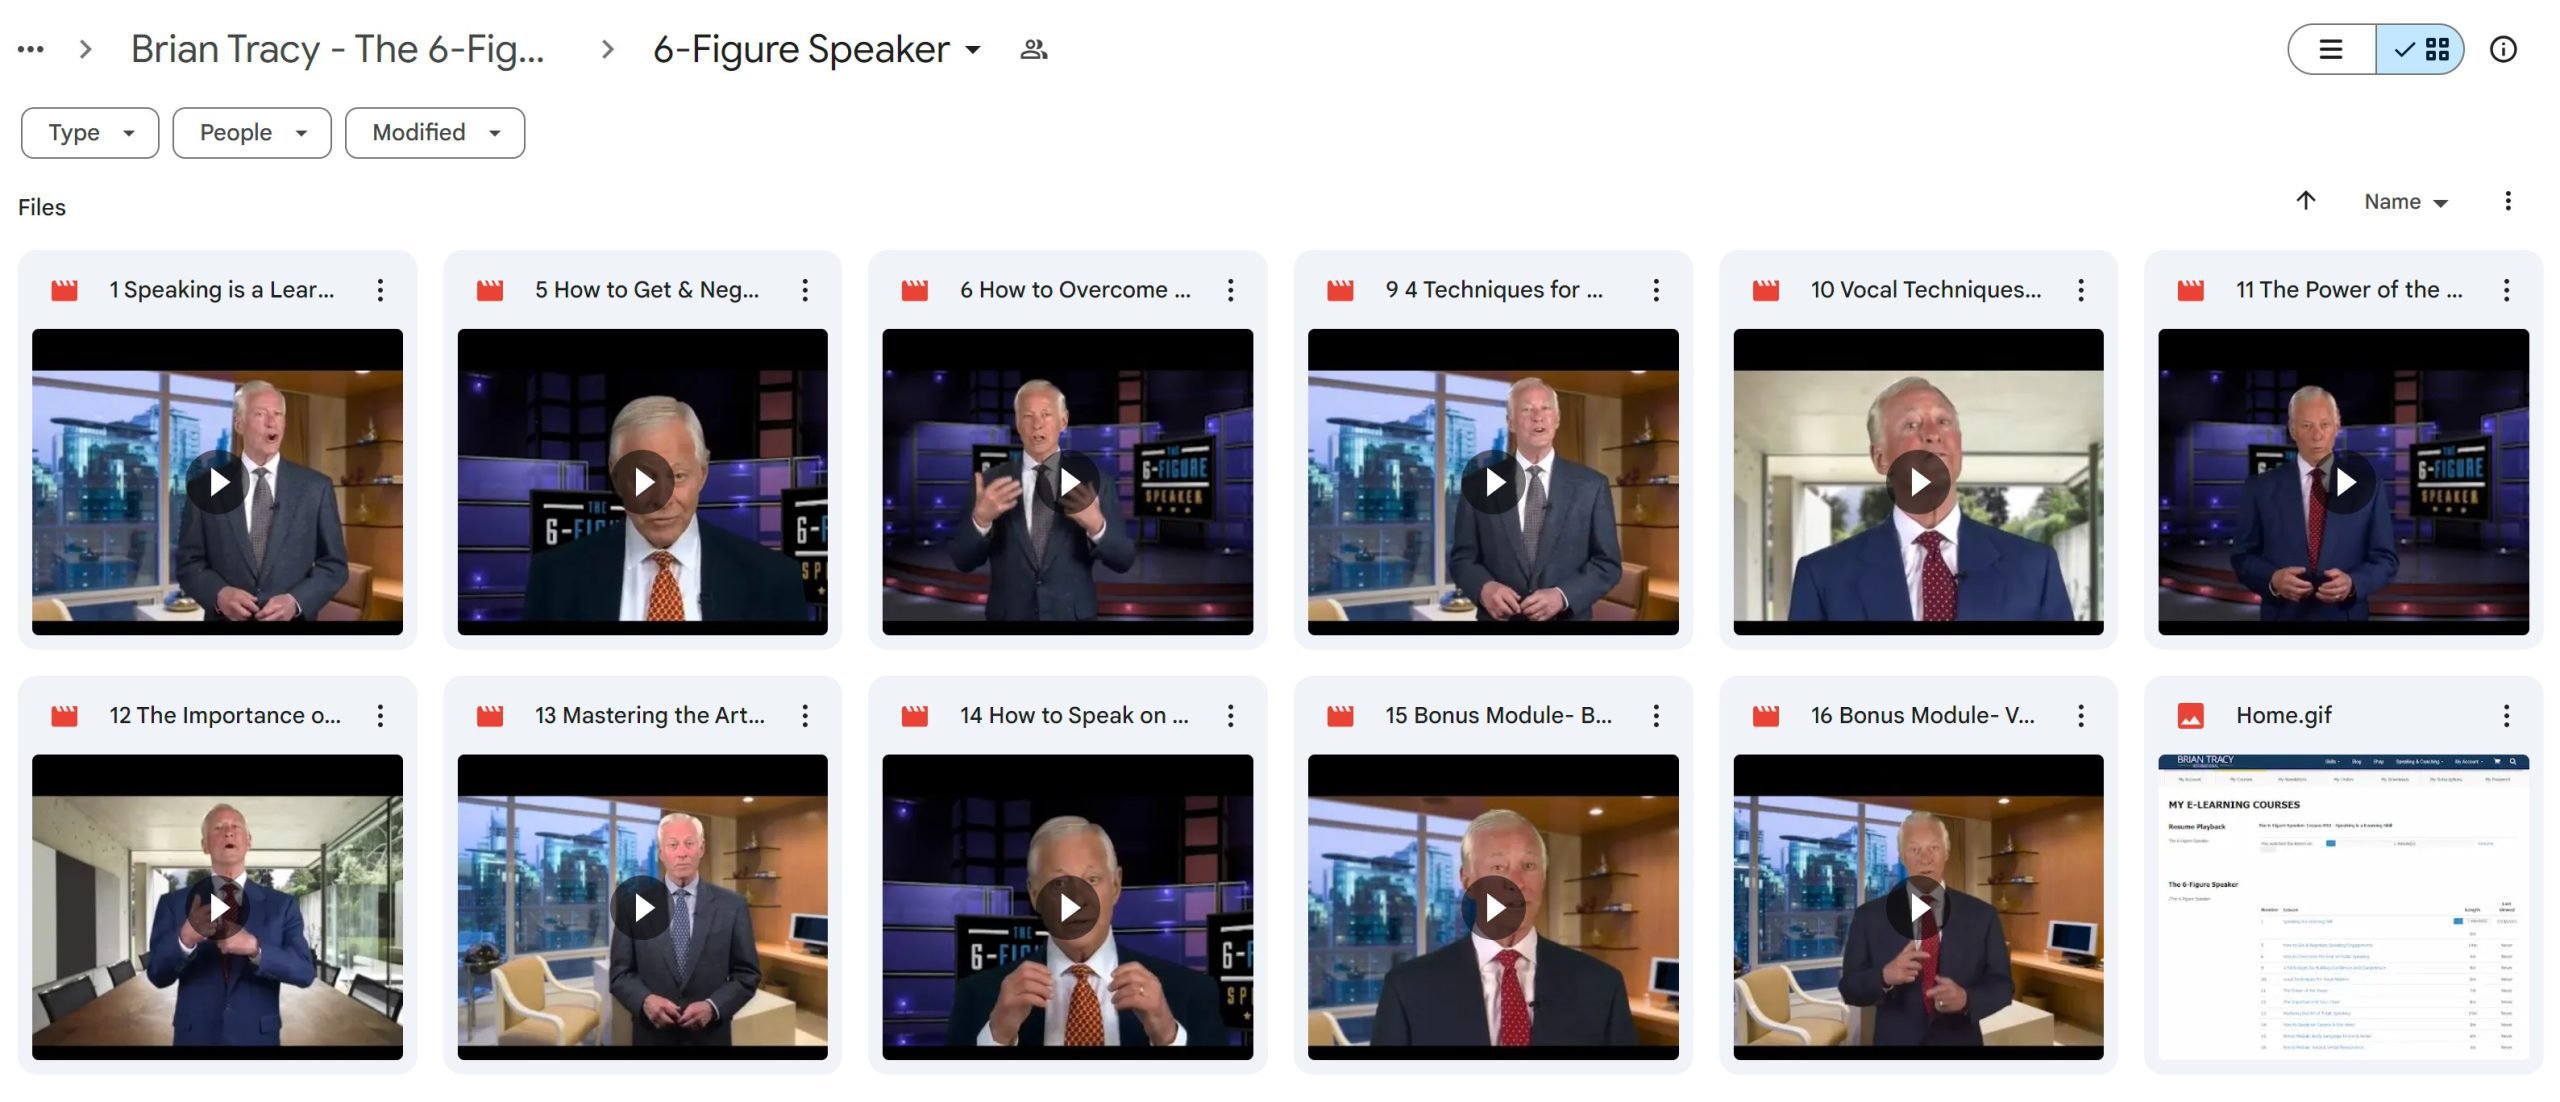 Brian Tracy The 6-Figure Speaker Virtual Training Course